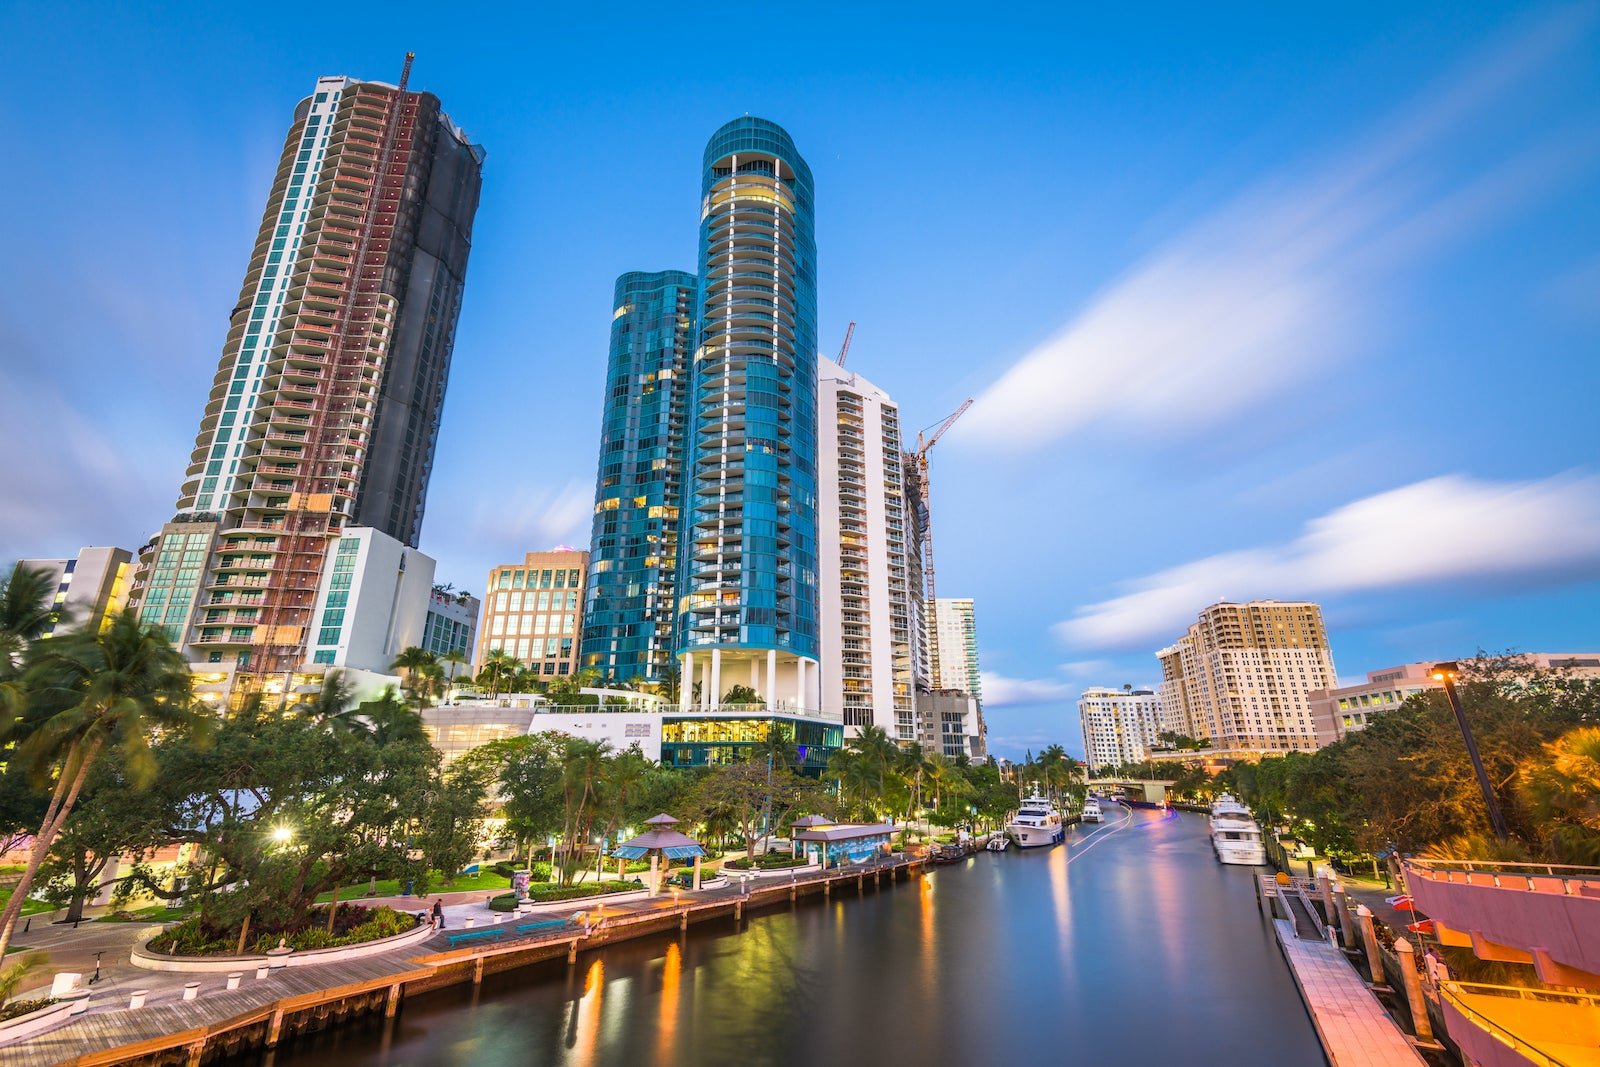 Deal alert: Make a winter escape to Florida for less than $200 round-trip